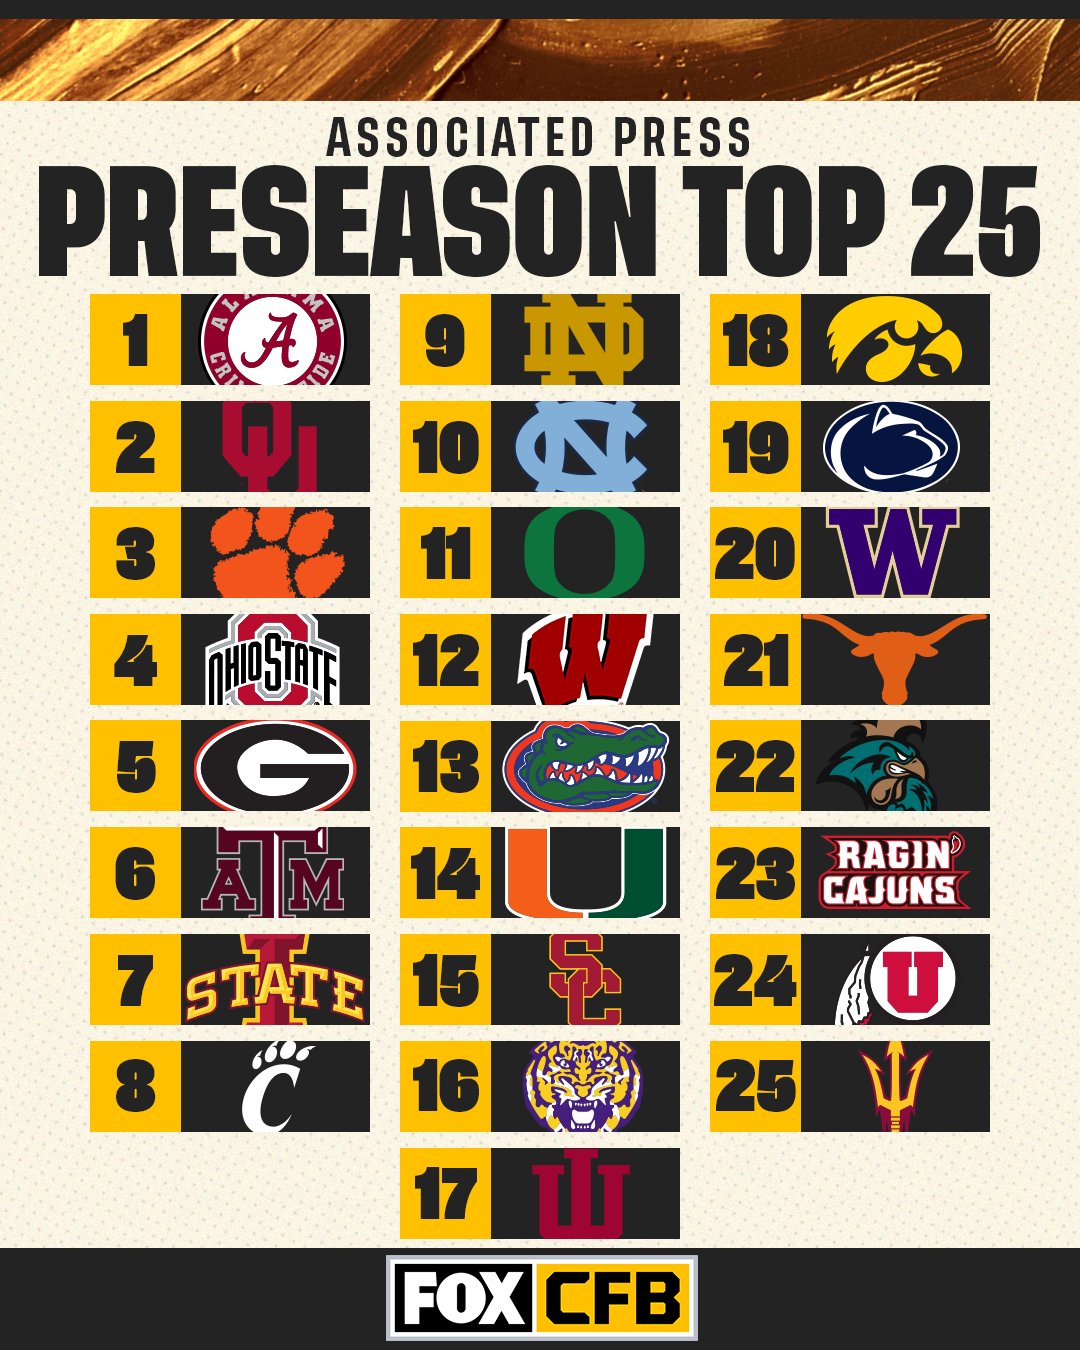 FOX College Football on Twitter "Here's a look at the AP Preseason Top